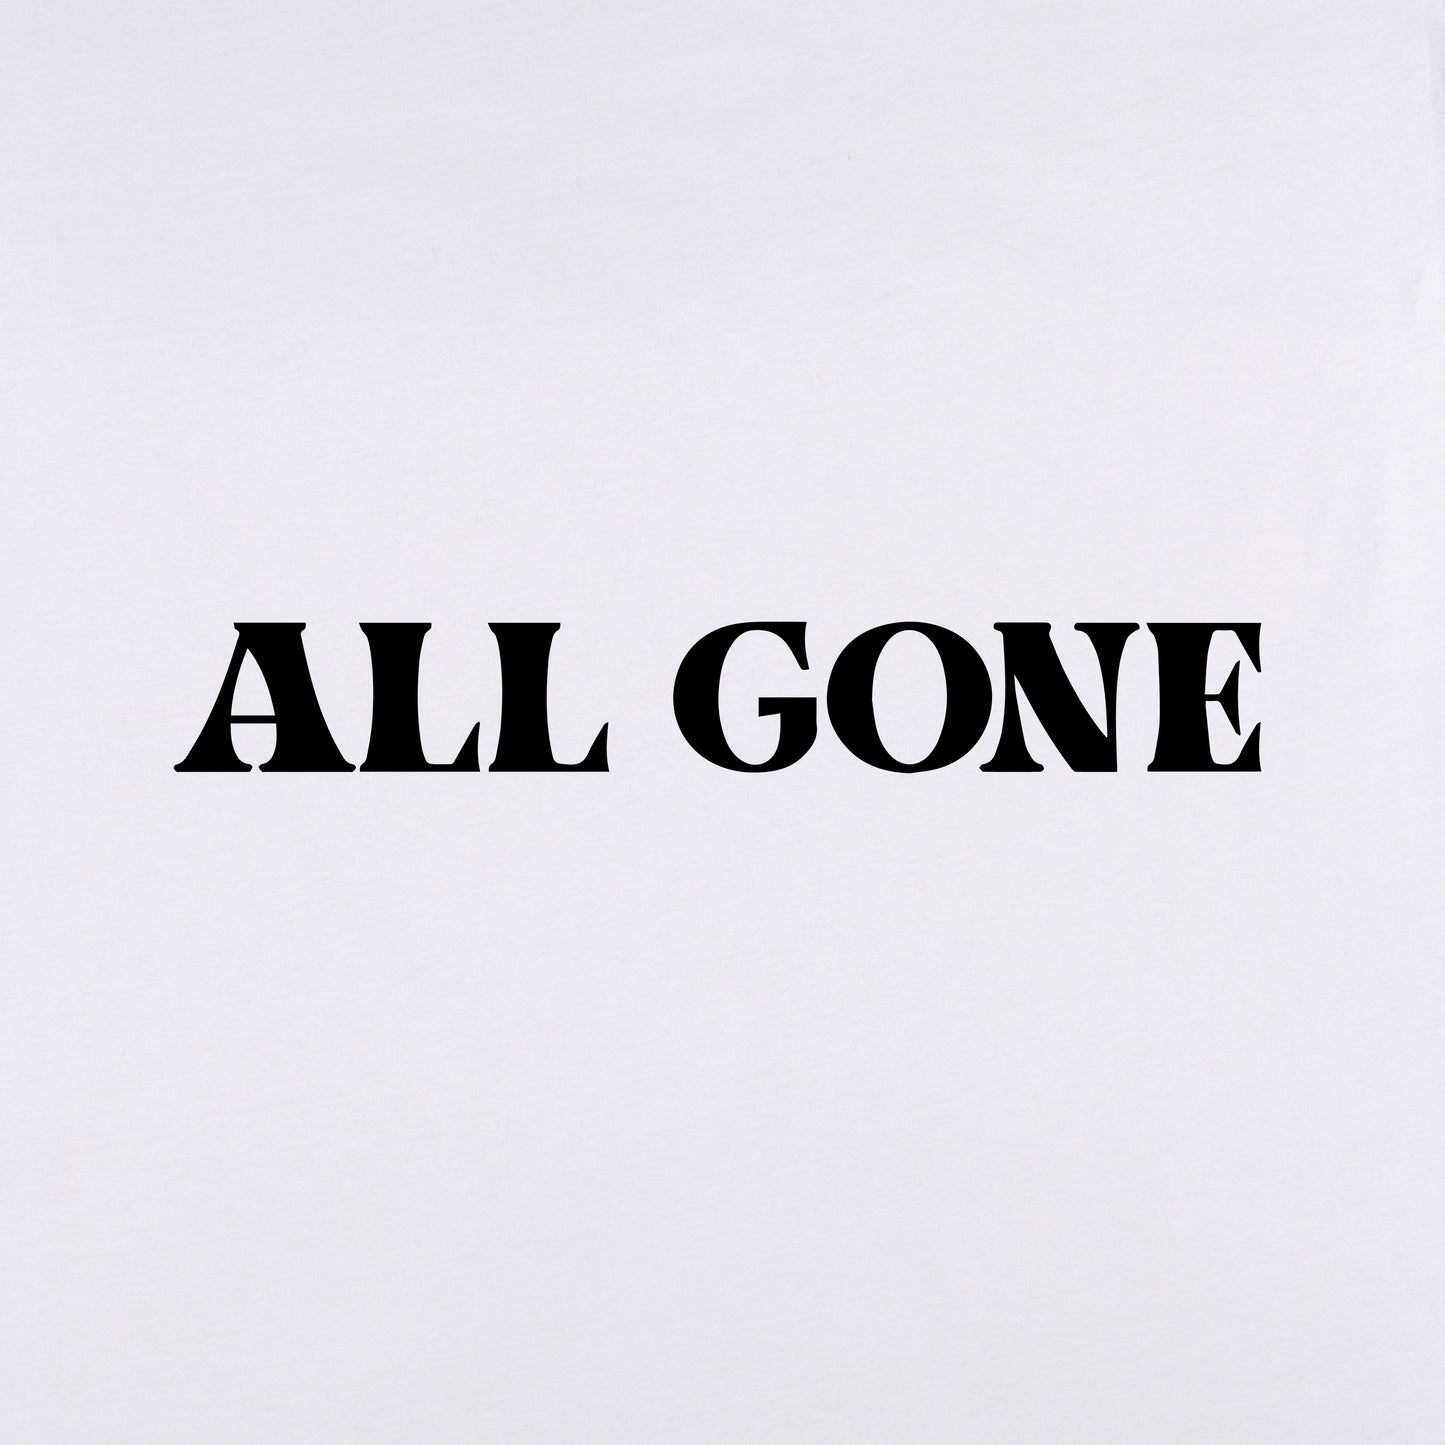 T-Shirt “ALL GONE” by DEL263